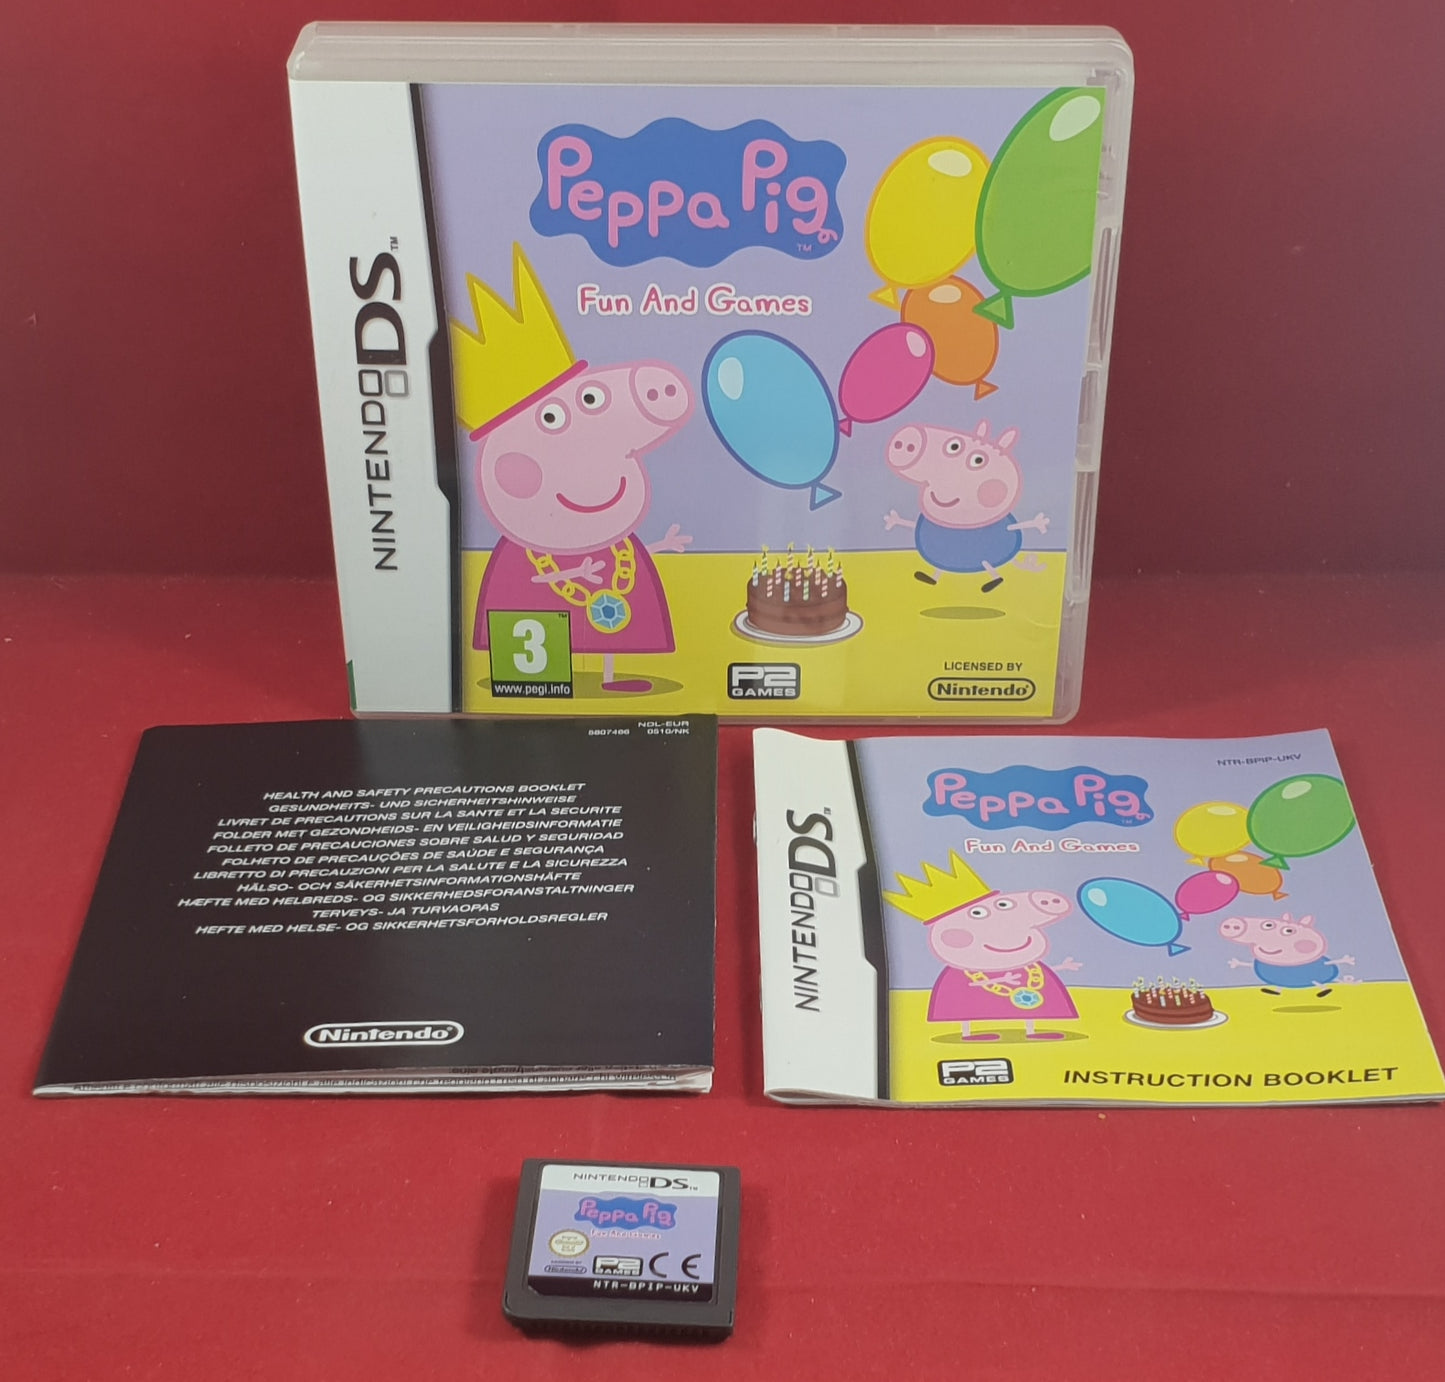 Peppa Pig Fun and Games Nintendo DS Game